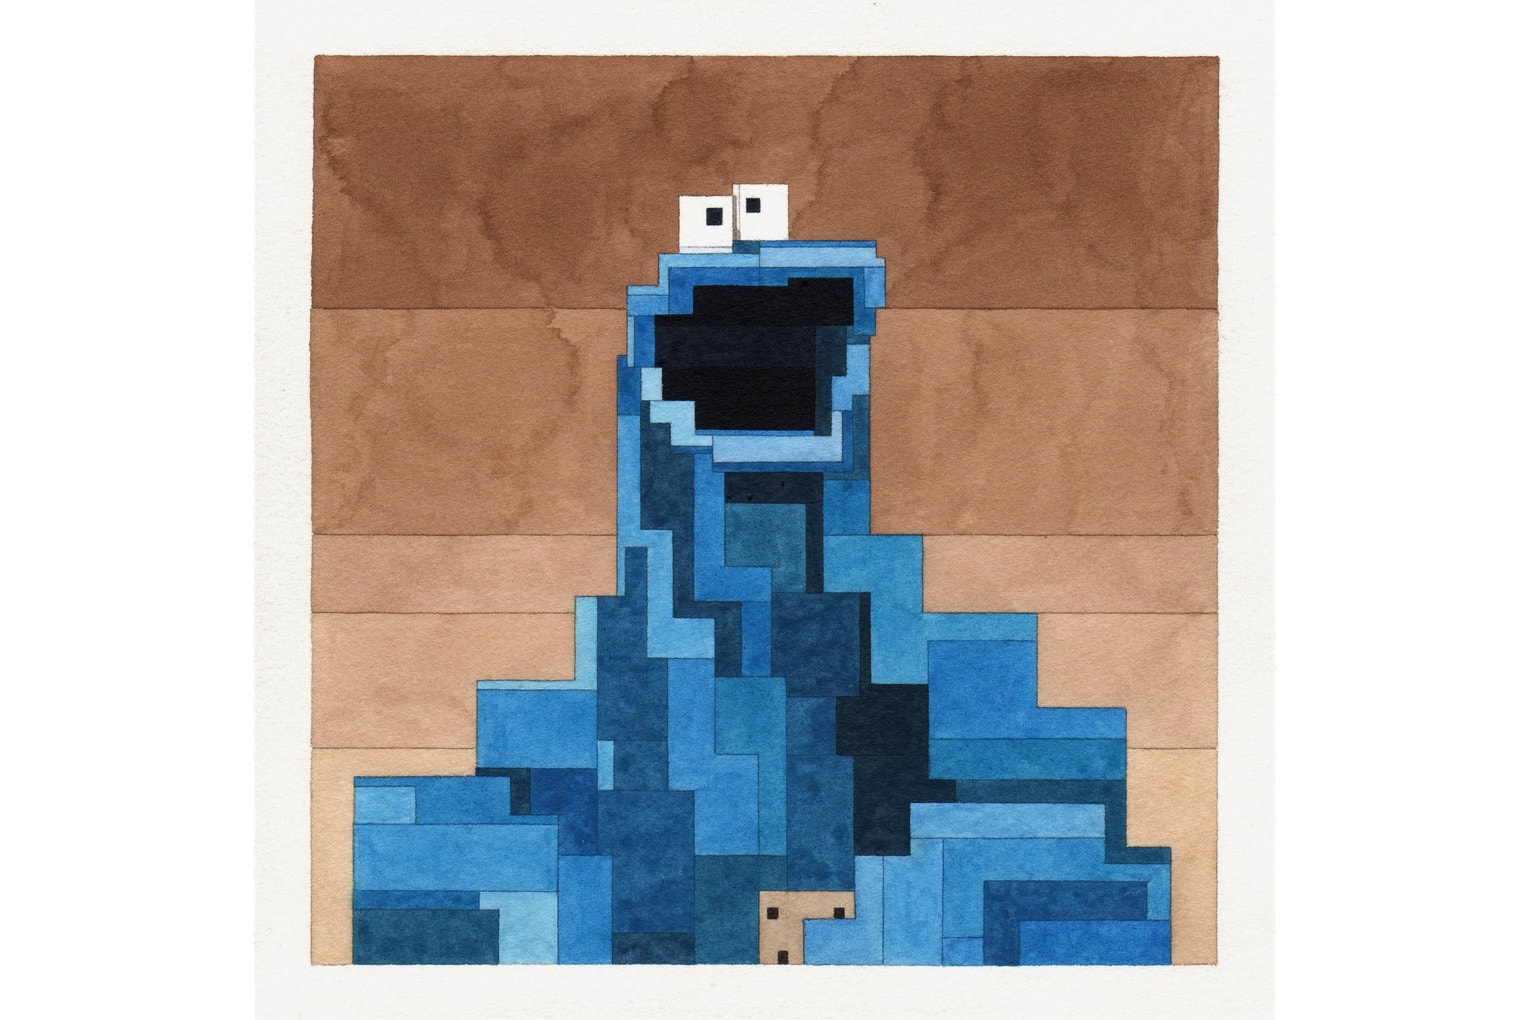 Adam Lister 8-Bit "Kids Collection" Cookie Monster The NeverEnding Story Harry Potter